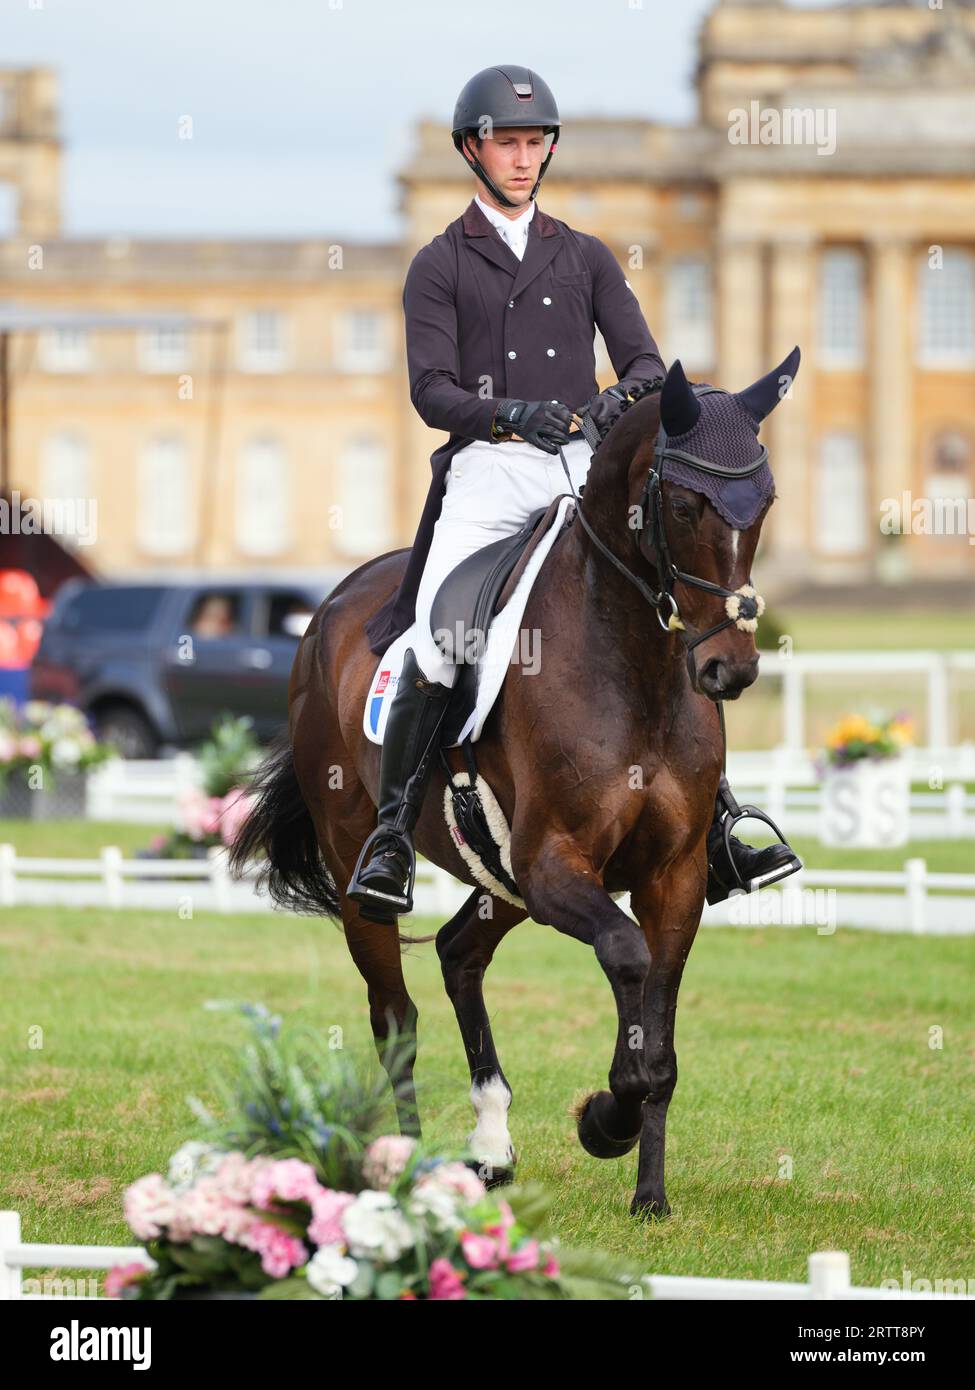 Arthur Duffort of France with Matterhorn Rising during the dressage test at the Blenheim Palace International Horse Trials on September 14, 2023, United Kingdom (Photo by Maxime David/MXIMD Pictures - mximd.com) Stock Photo